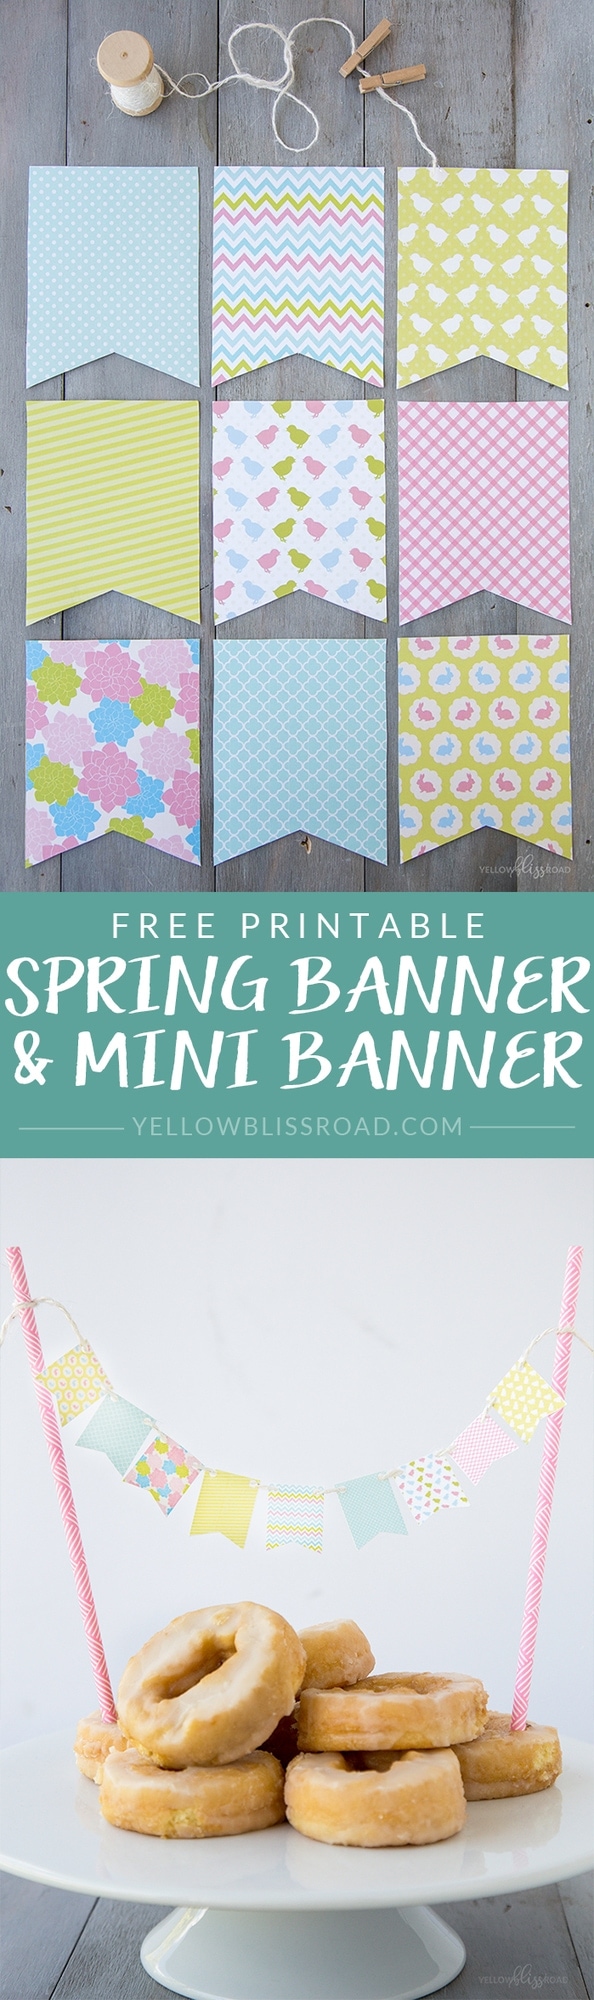 Free Printable Spring Banner and Mini Banner